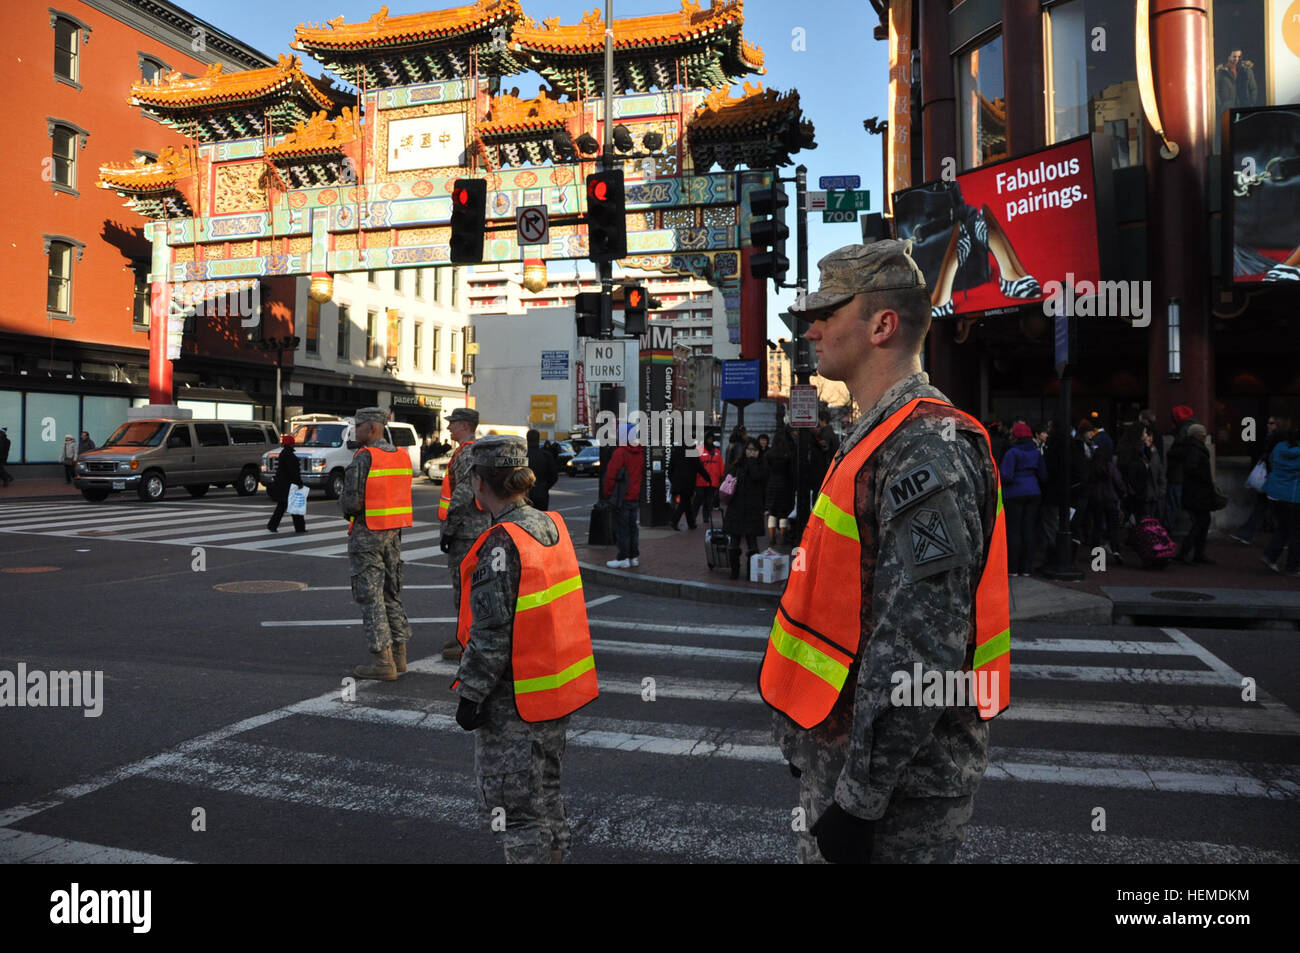 Virginia National Guard soldiers from the Staunton-based Detachment 1 of the 266th MP Company operate traffic control points in Washington, D.C. in support of the Presidential Inauguration Jan. 21, 2013. More than 600 Virginia National Guard soldiers and airmen joined a force of approximately 6,000 National Guard personnel from 25 states and territories supporting the inauguration with traffic control, crowd management, communications and chaplain support. (Photo by Staff Sgt. Terra C. Gatti, Virginia Guard Public Affairs) Virginia MPs assist with inauguration security 130121-A--286 Stock Photo